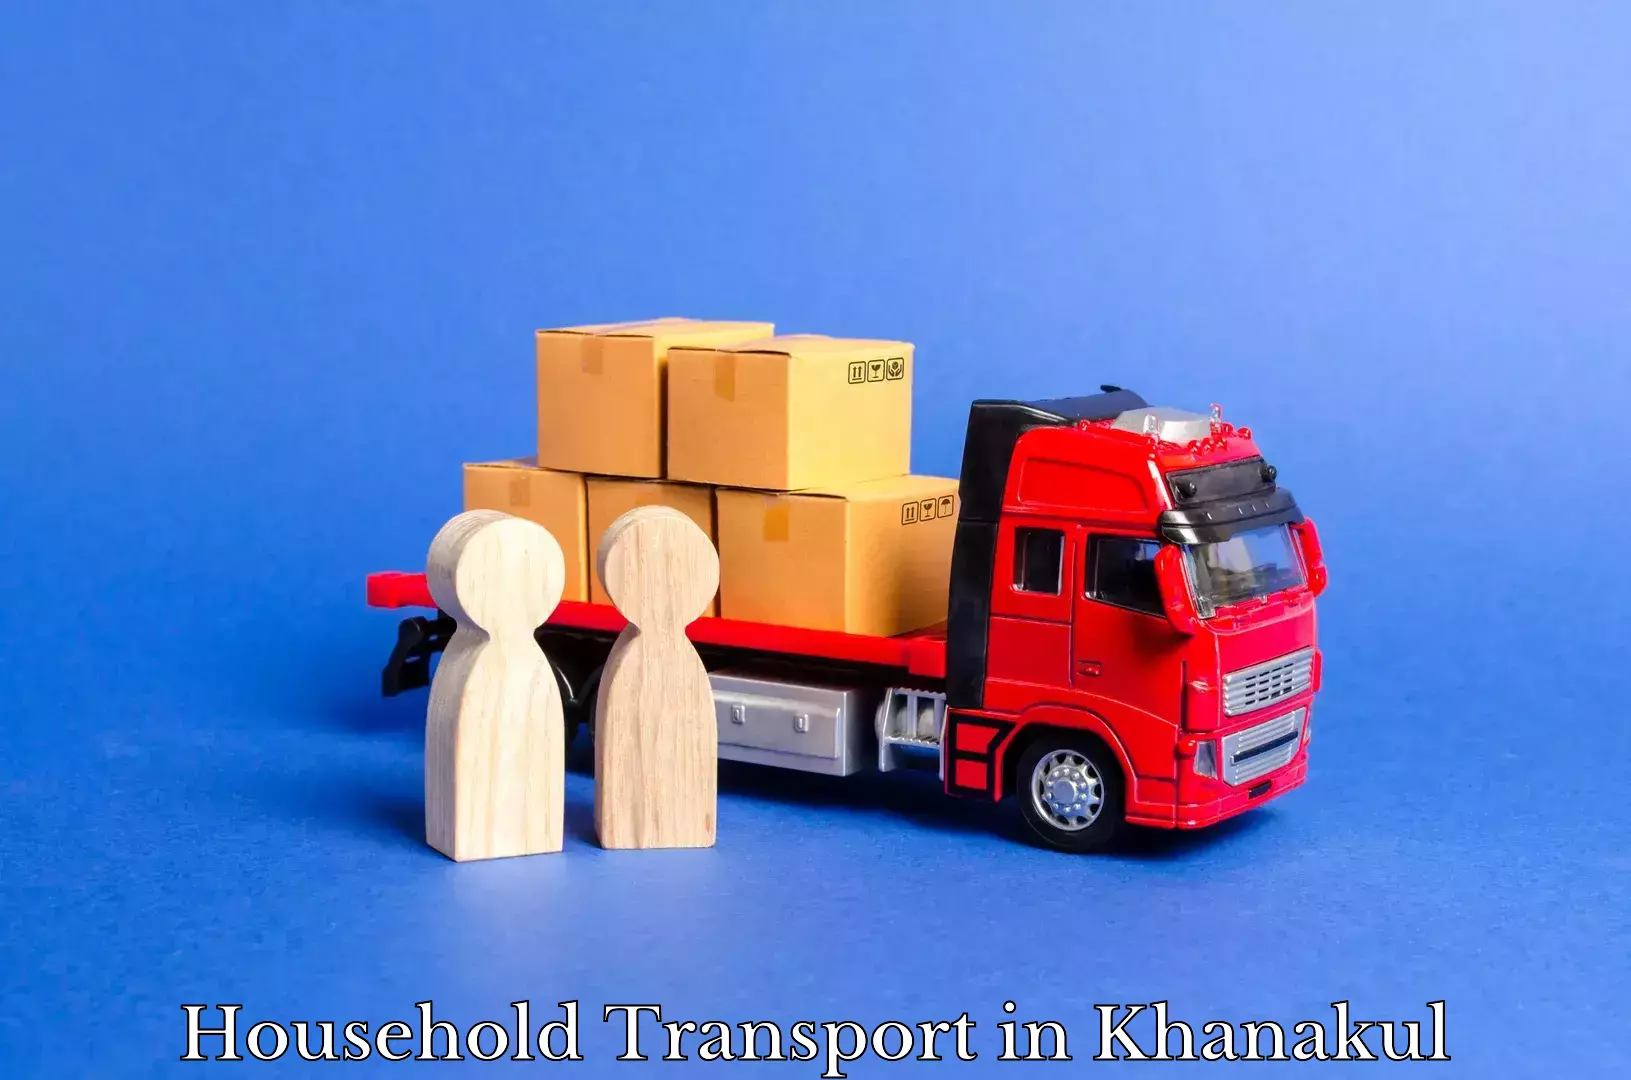 Home relocation experts in Khanakul